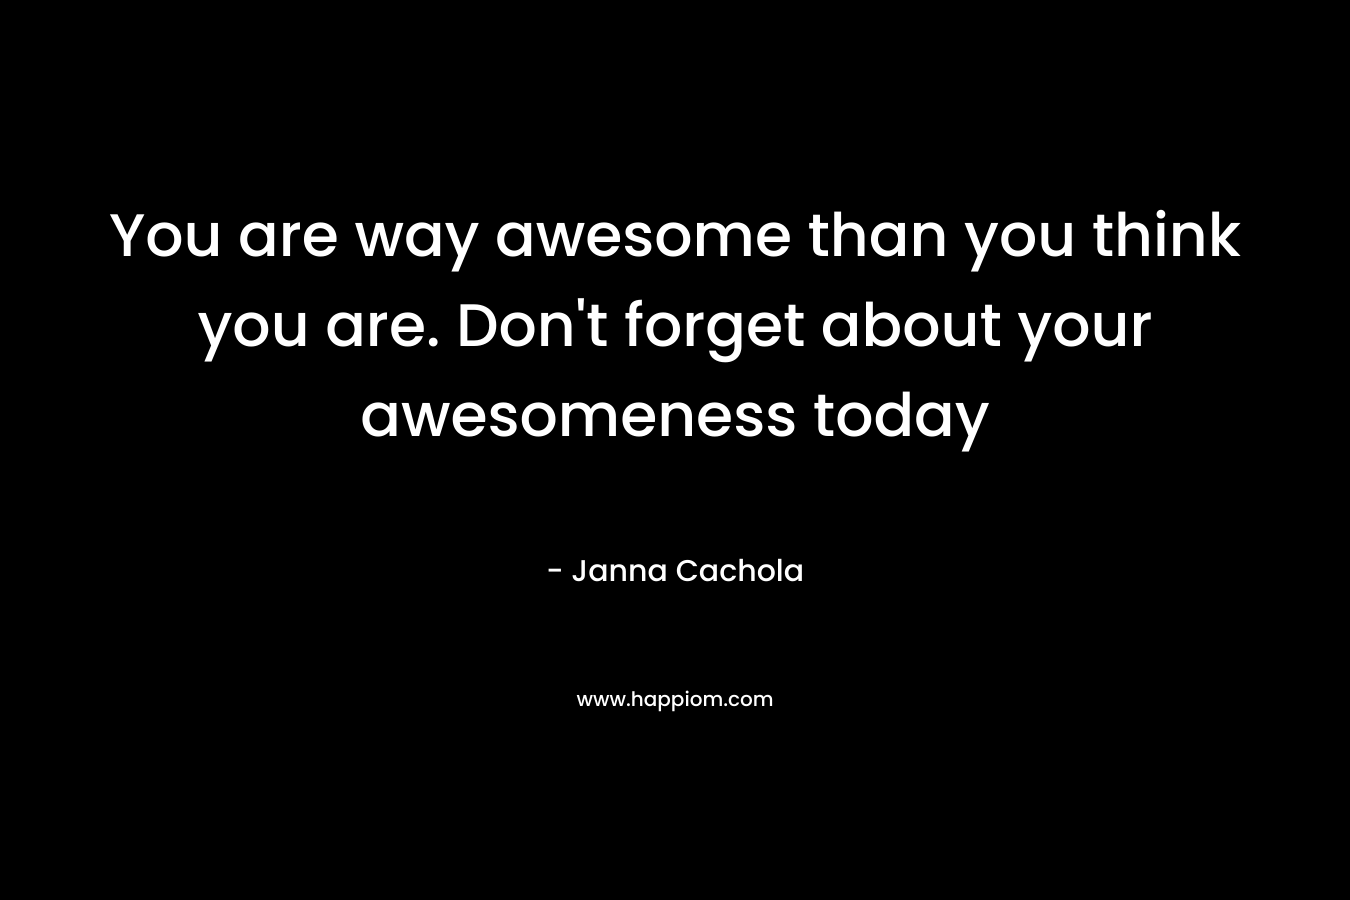 You are way awesome than you think you are. Don't forget about your awesomeness today